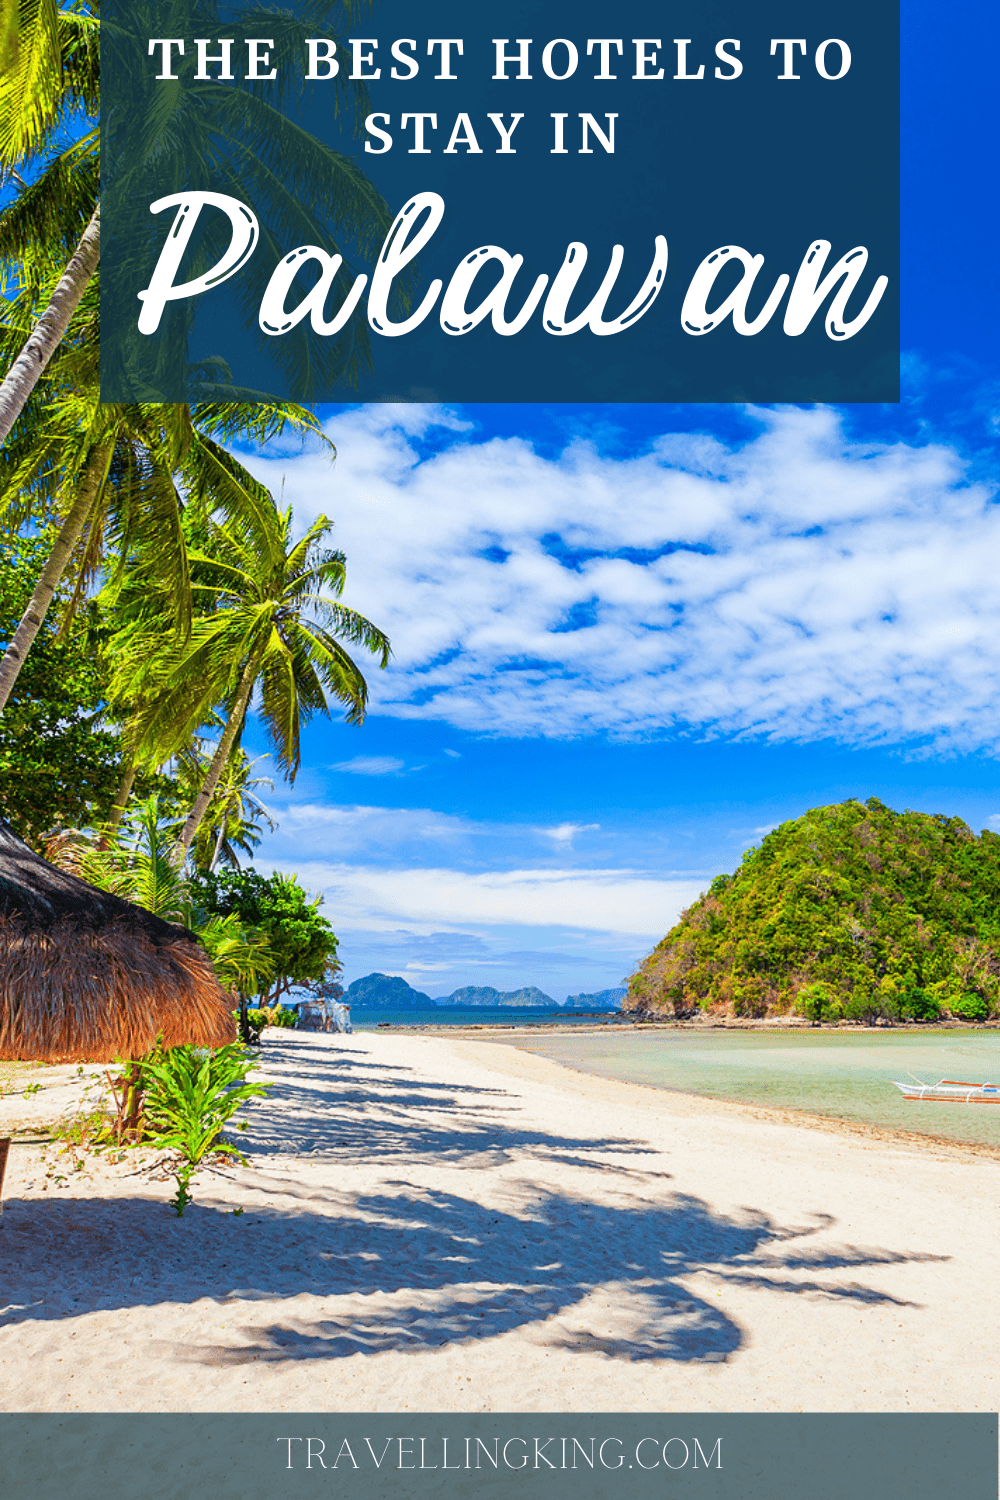 Where to stay in Palawan